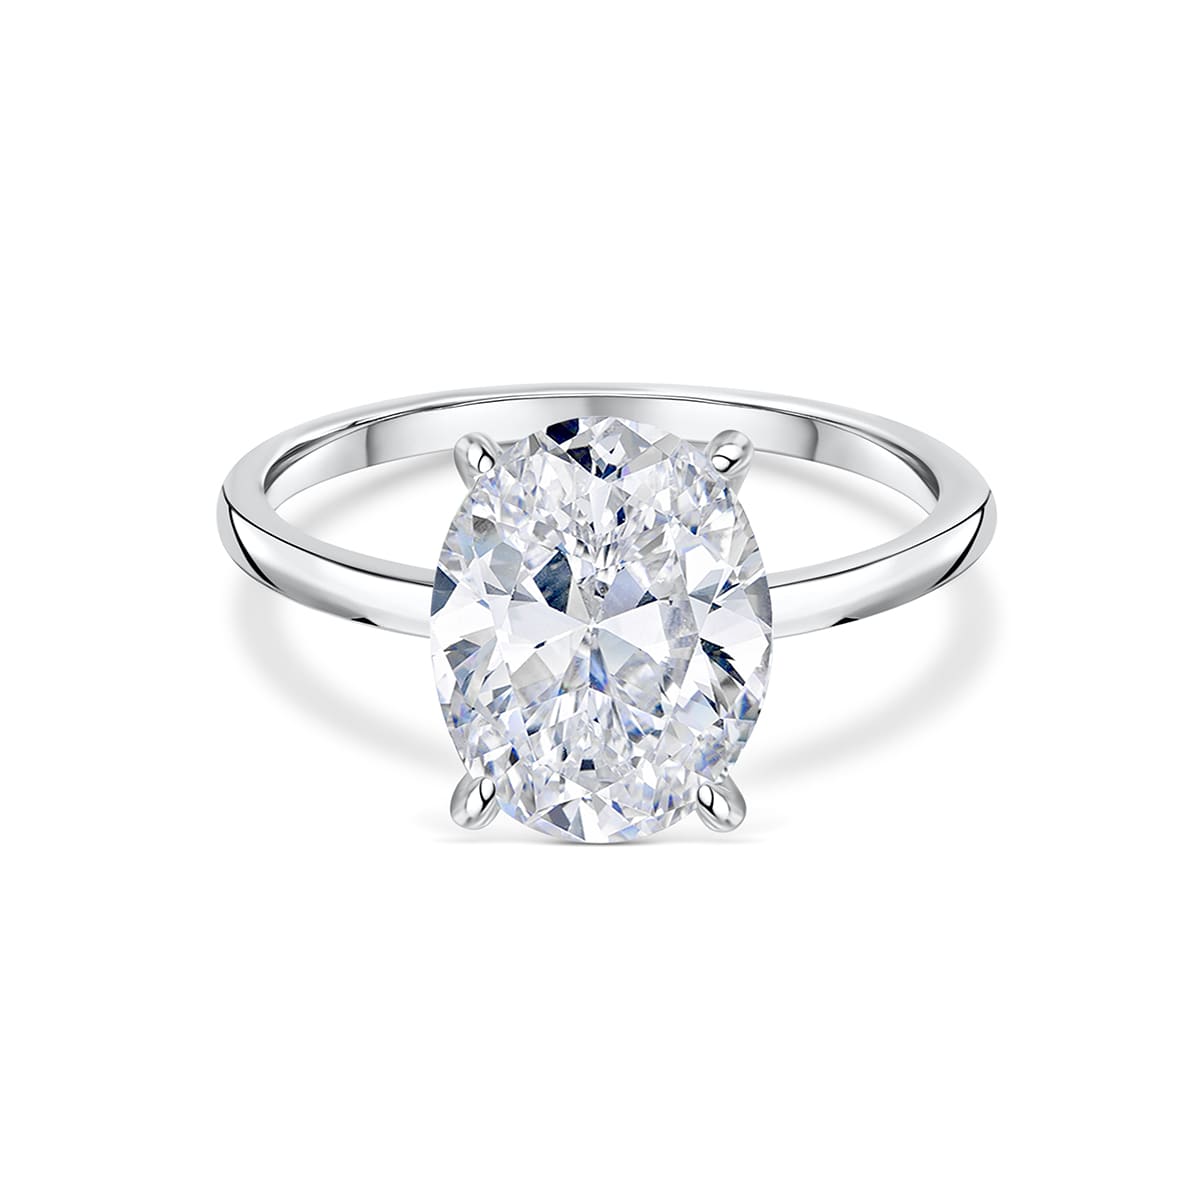 Hidden halo solitaire engagement ring